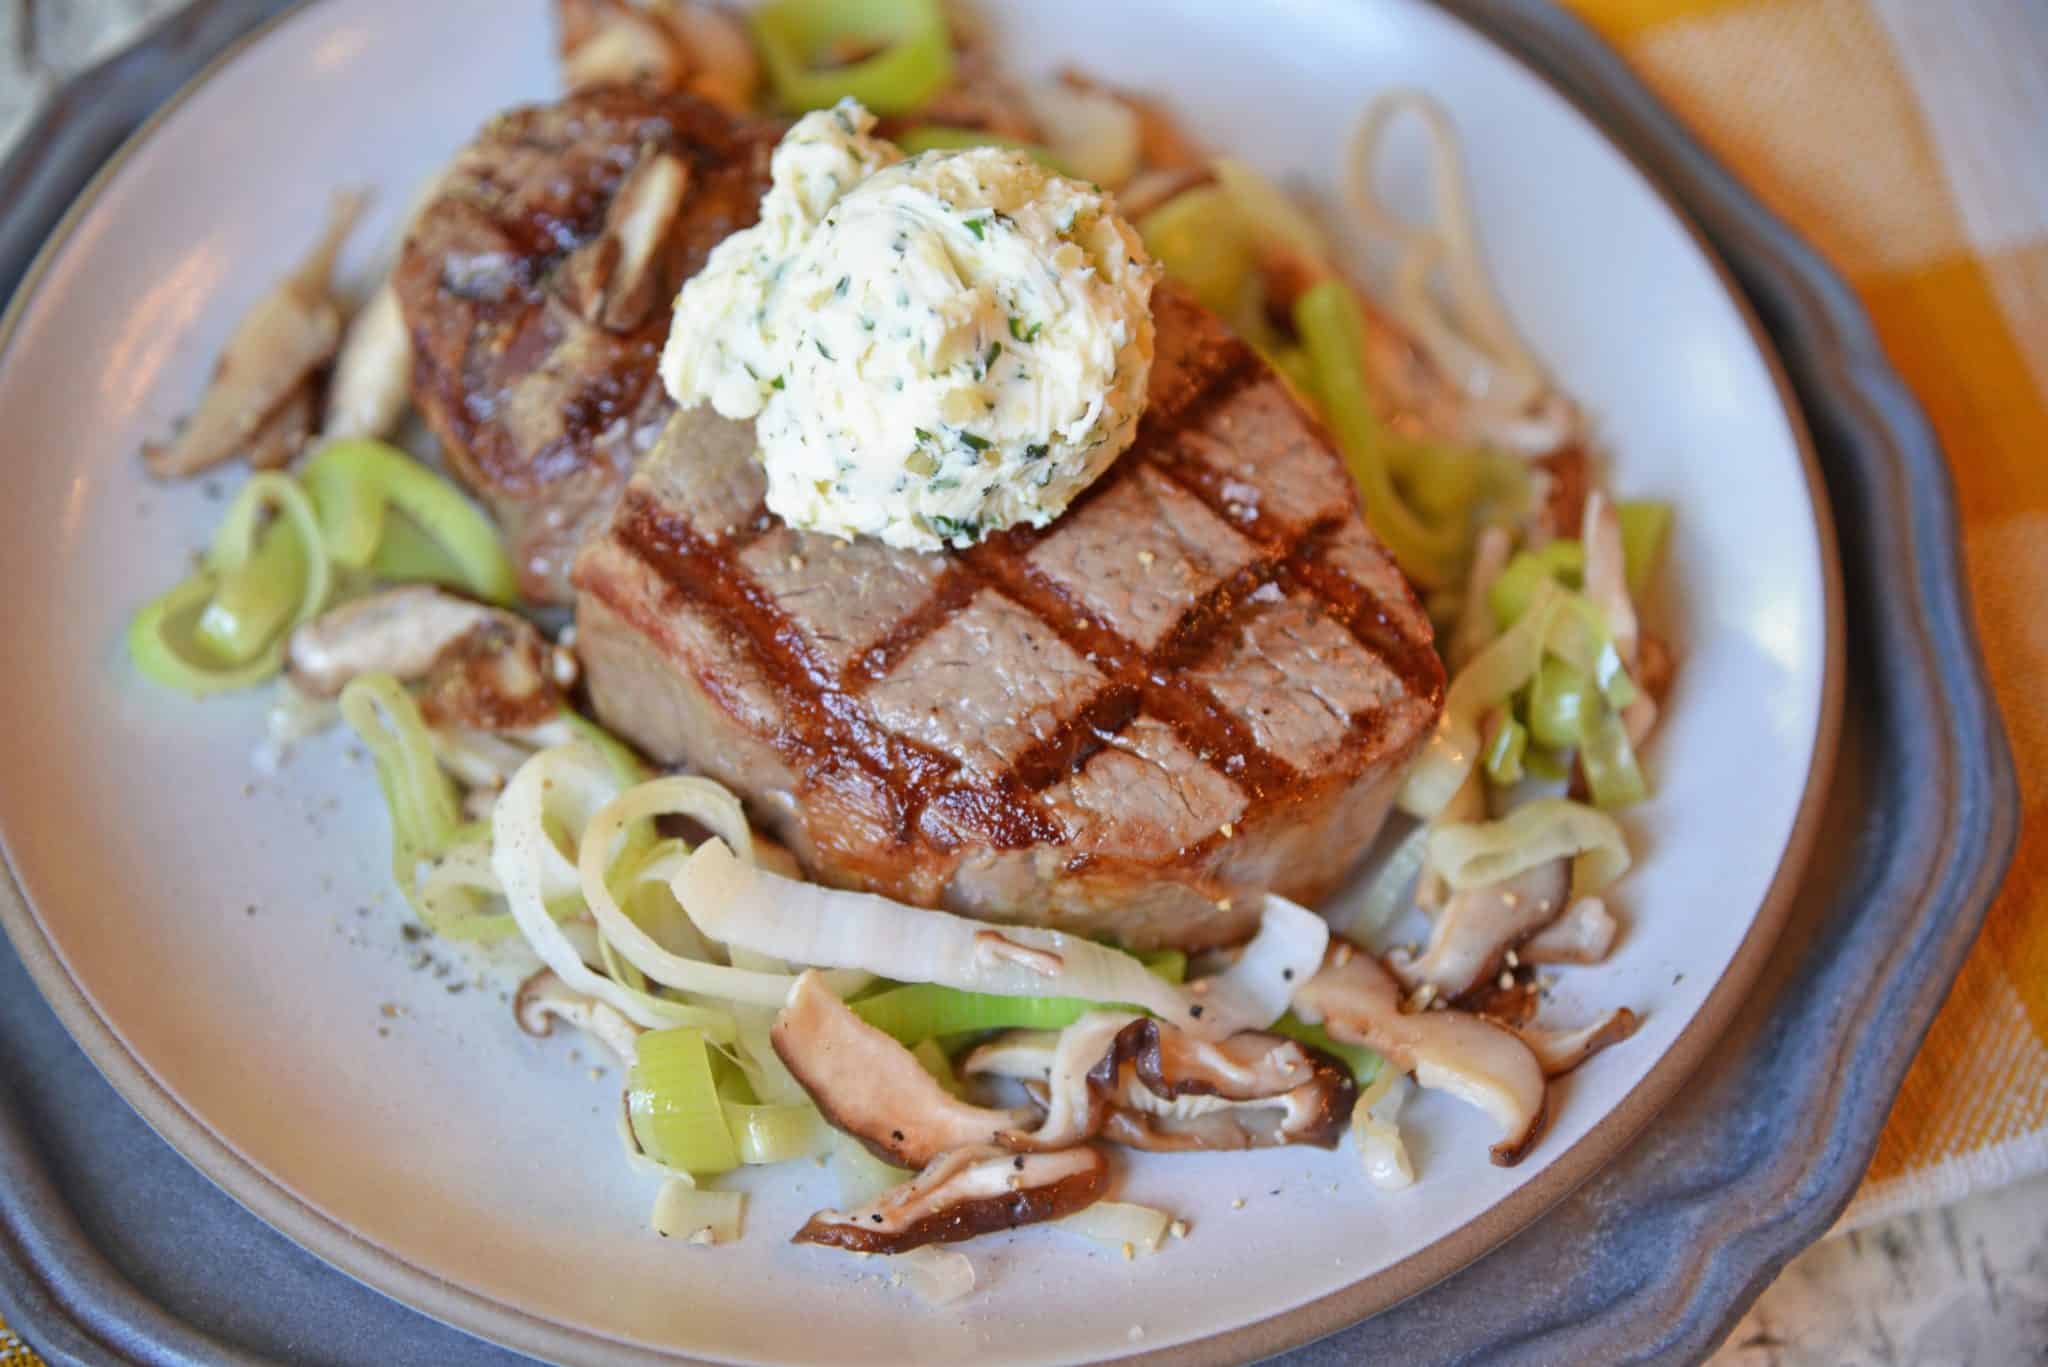 Garlic Butter Steak is perfect for any occasion! Grilled filet mignon is perfect for a special date night or just for a typical weeknight meal! #filetmignonrecipe #garlicbuttersteak #grillingfiletmignon www.savoryexperiments.com